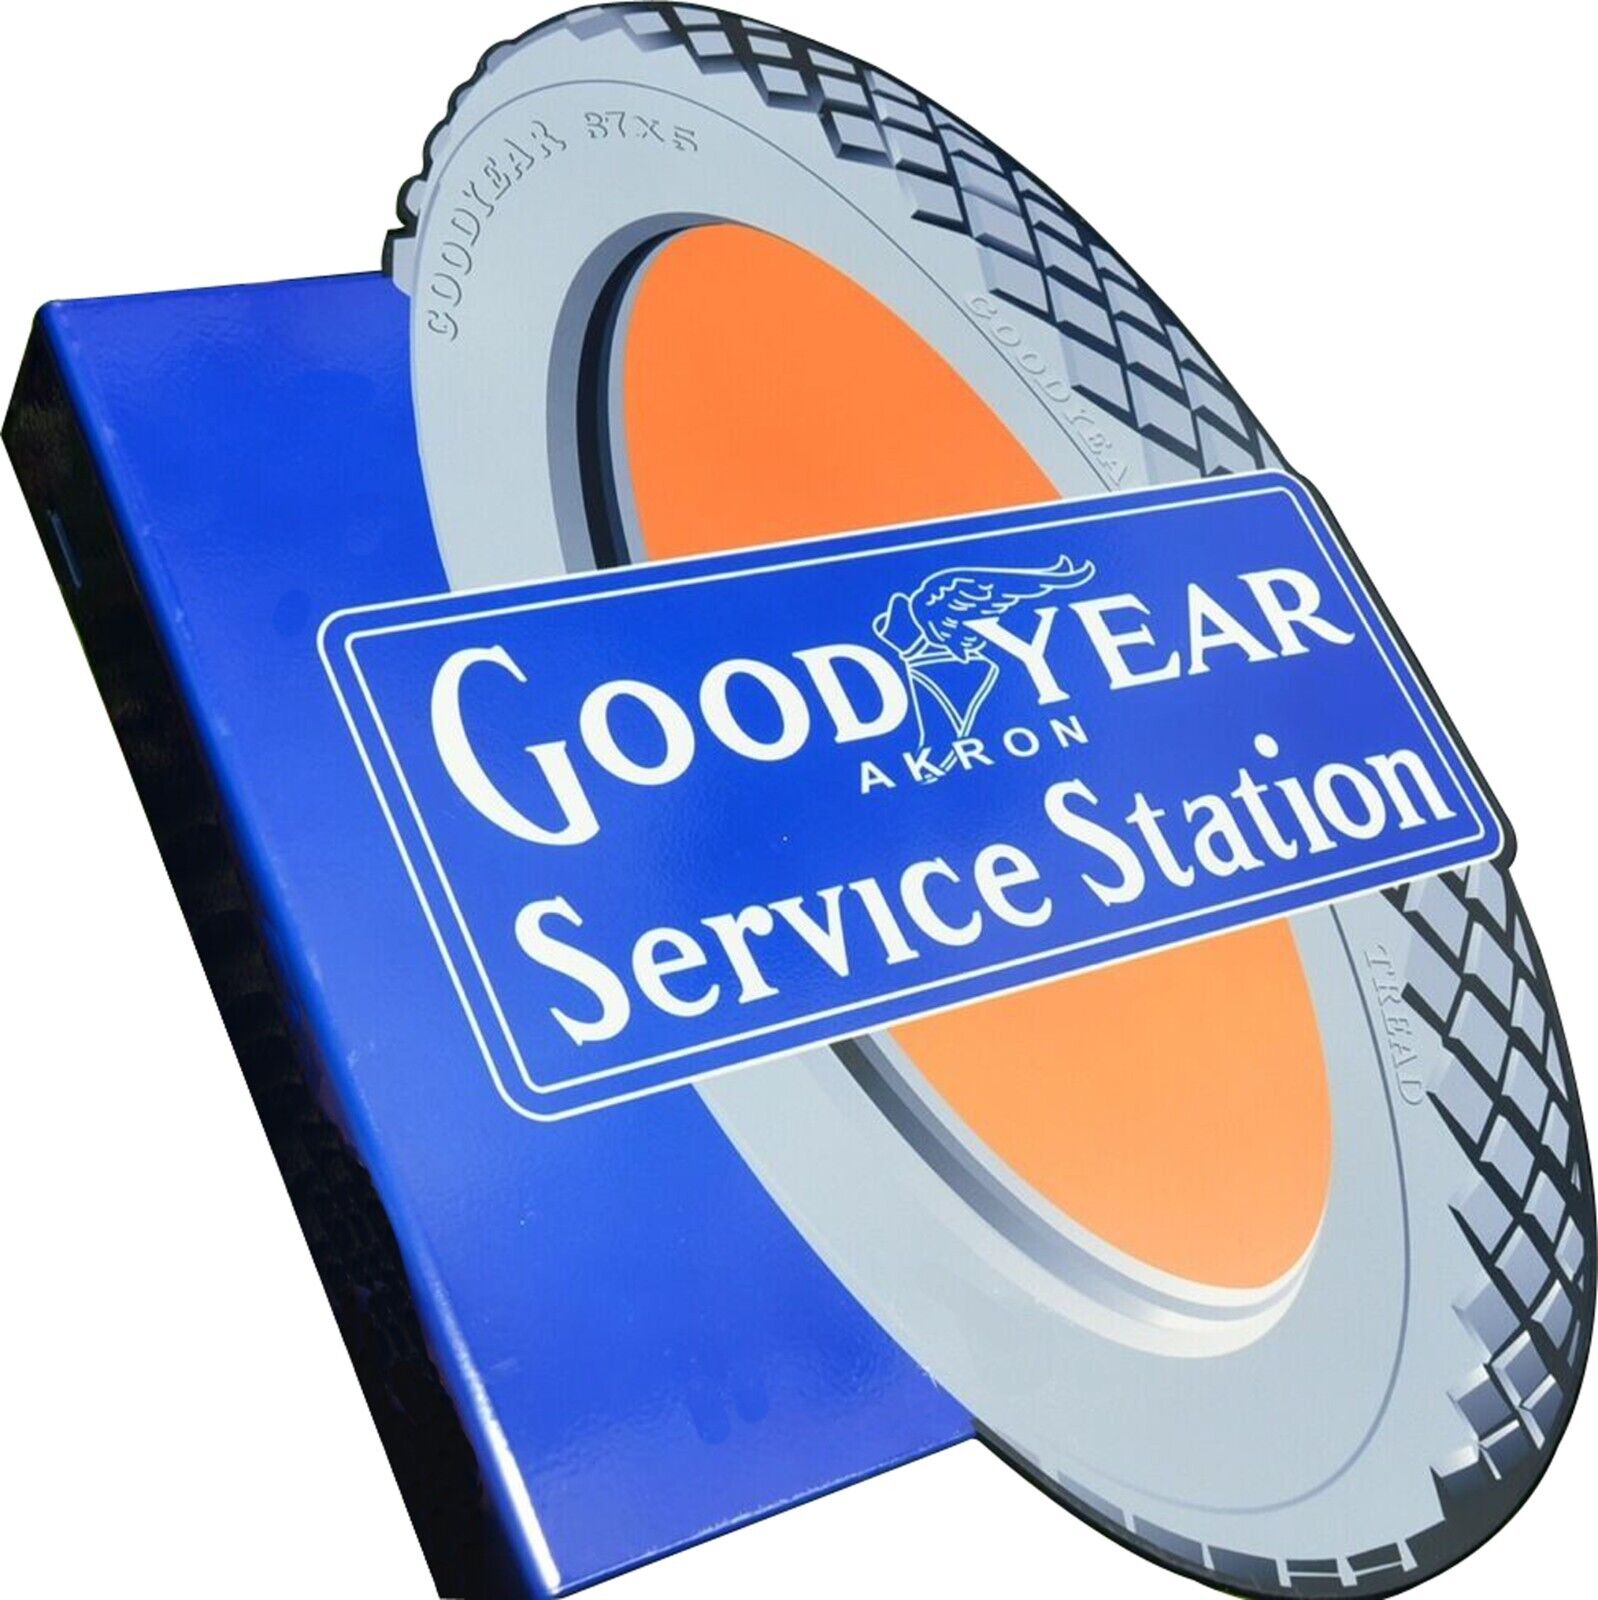 PORCELAIN GOOD YEAR SERVICE STATION ENAMEL SIGN 36 INCHES